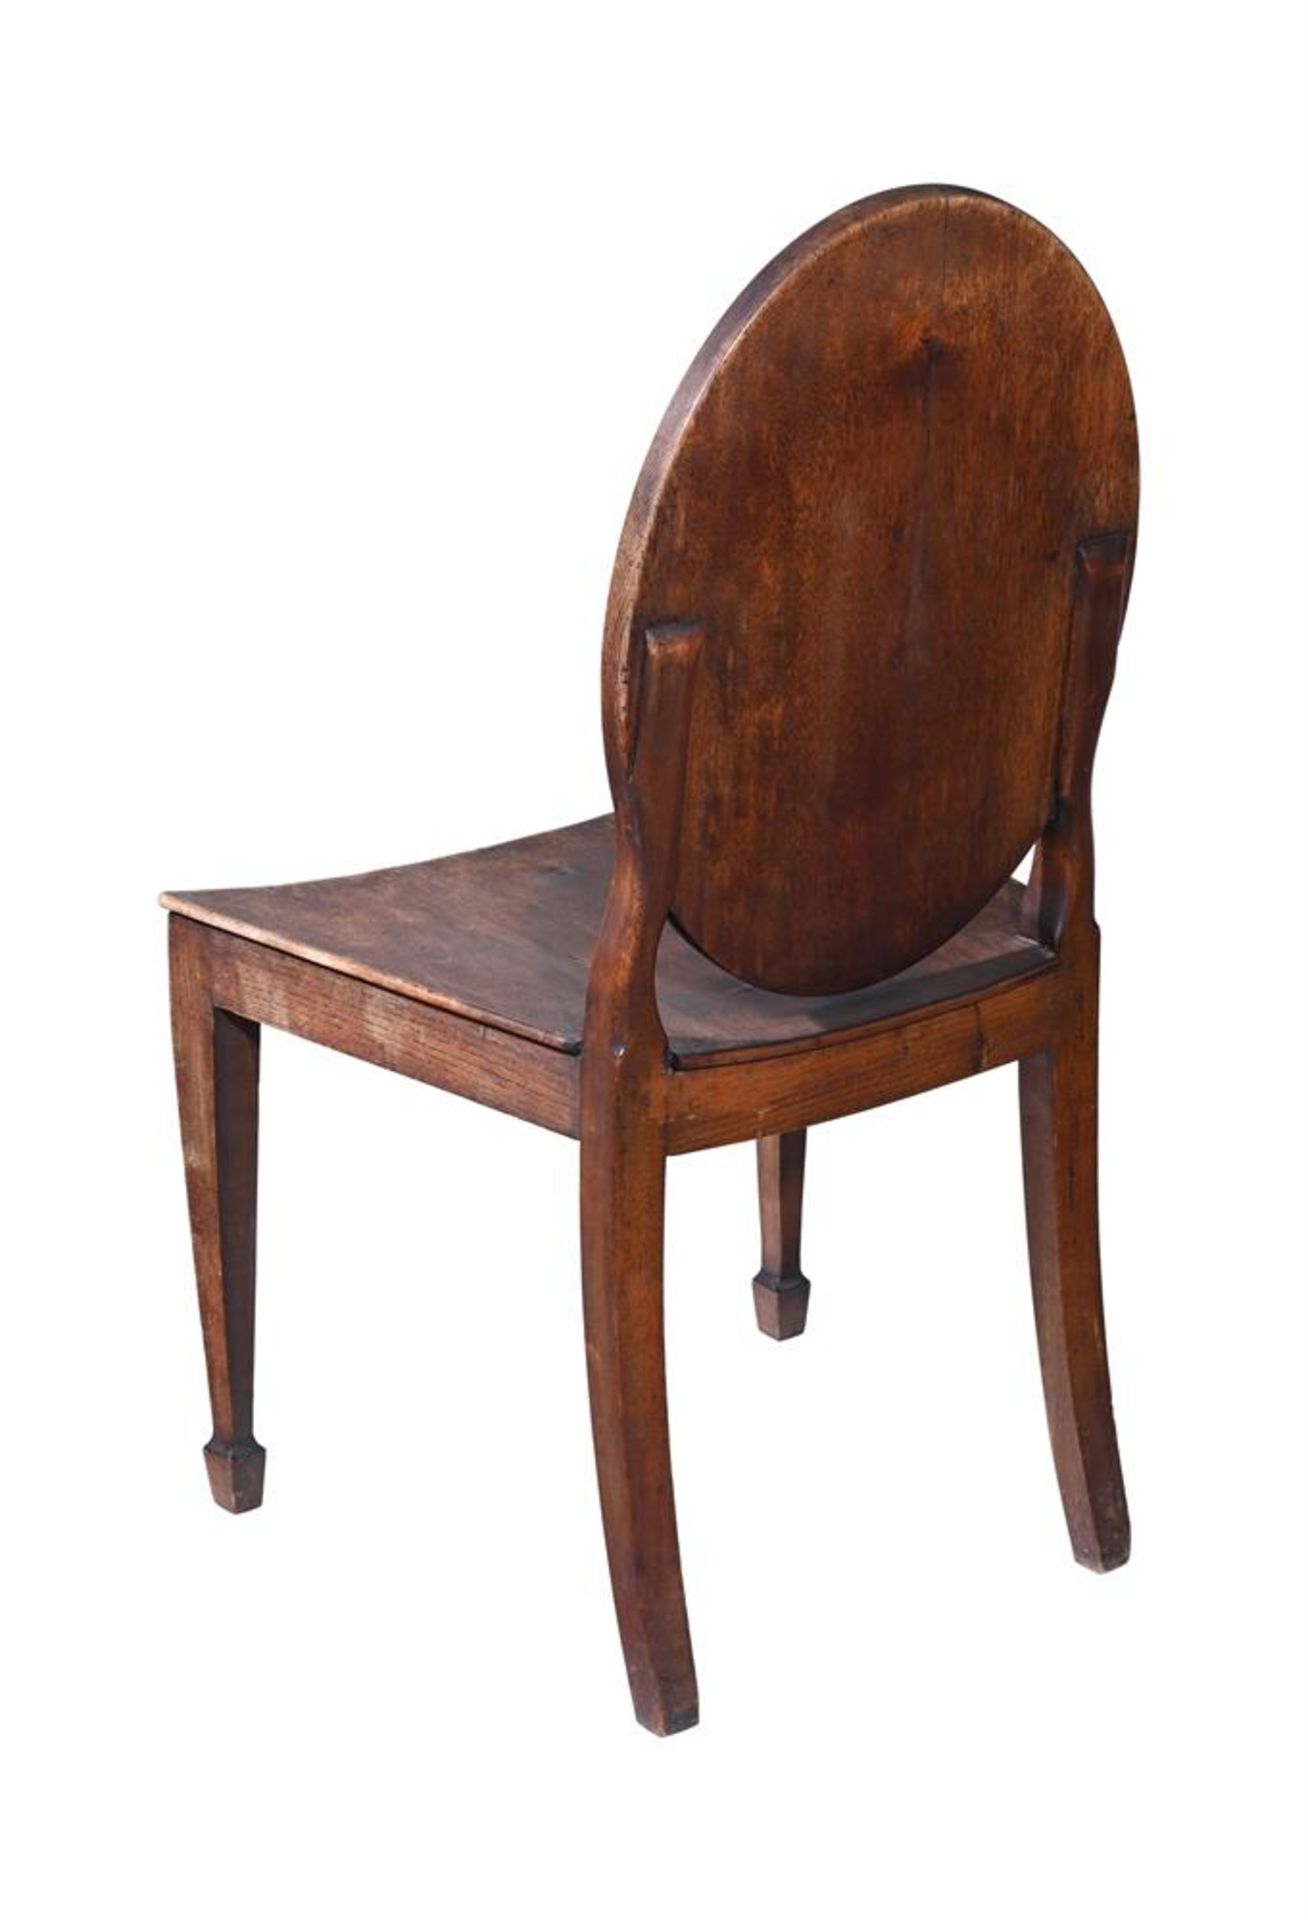 A PAIR OF GEORGE III ELM AND ASH HALL CHAIRS, IN THE MANNER OF INCE & MAYHEW, CIRCA 1770 - Image 5 of 5